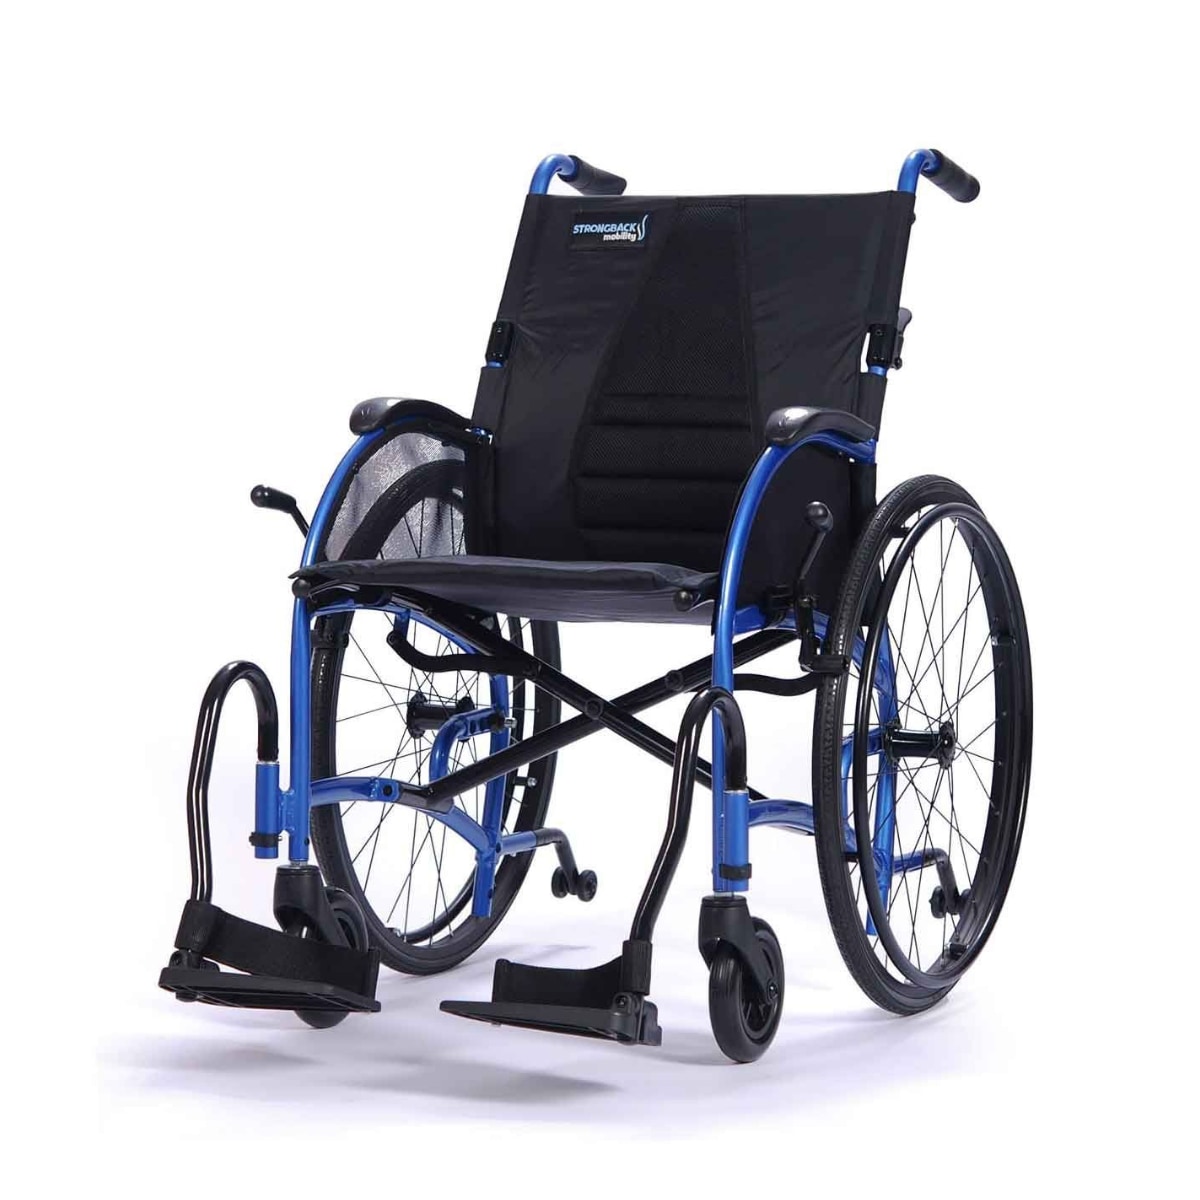 Strongback Manual Wheelchair with blue frame